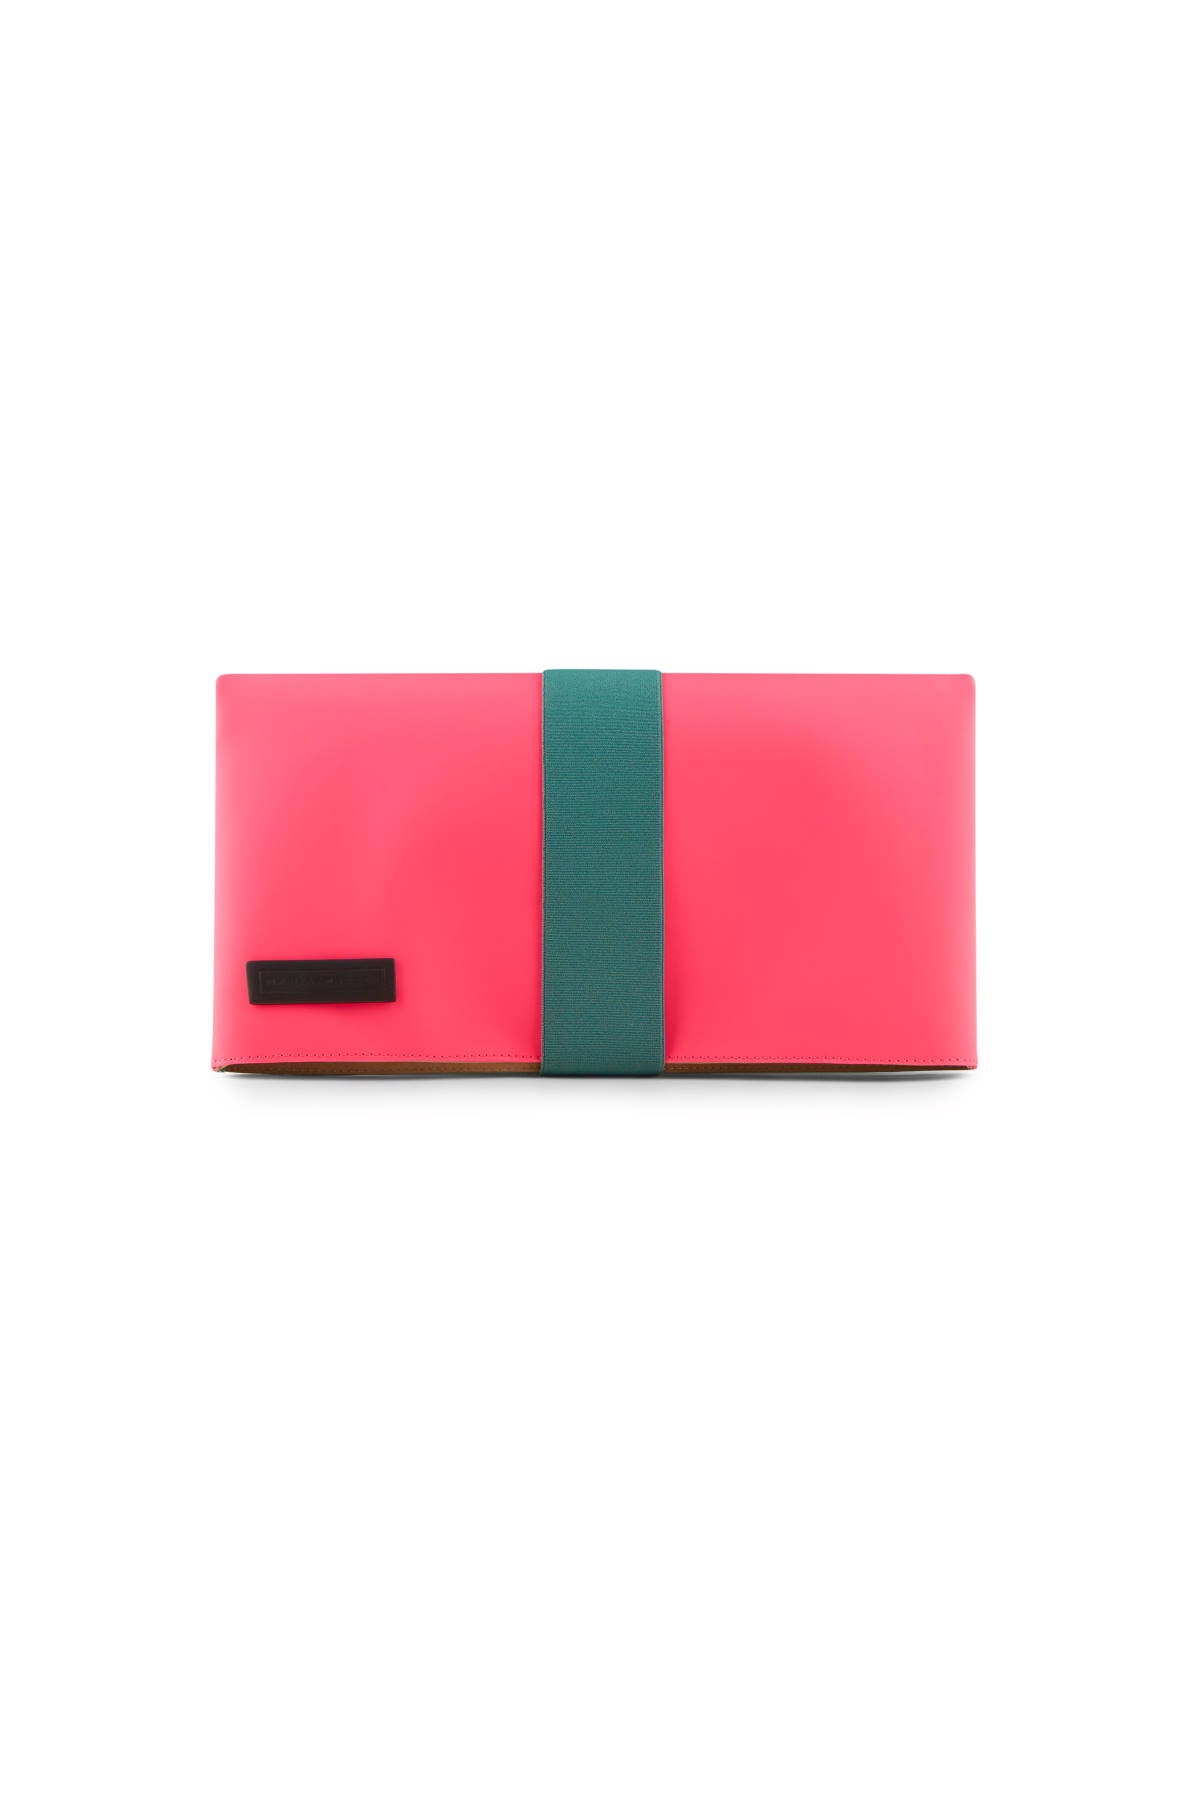 Clutch bag in Pink Fuchsia | Green holographic leather handbag ...